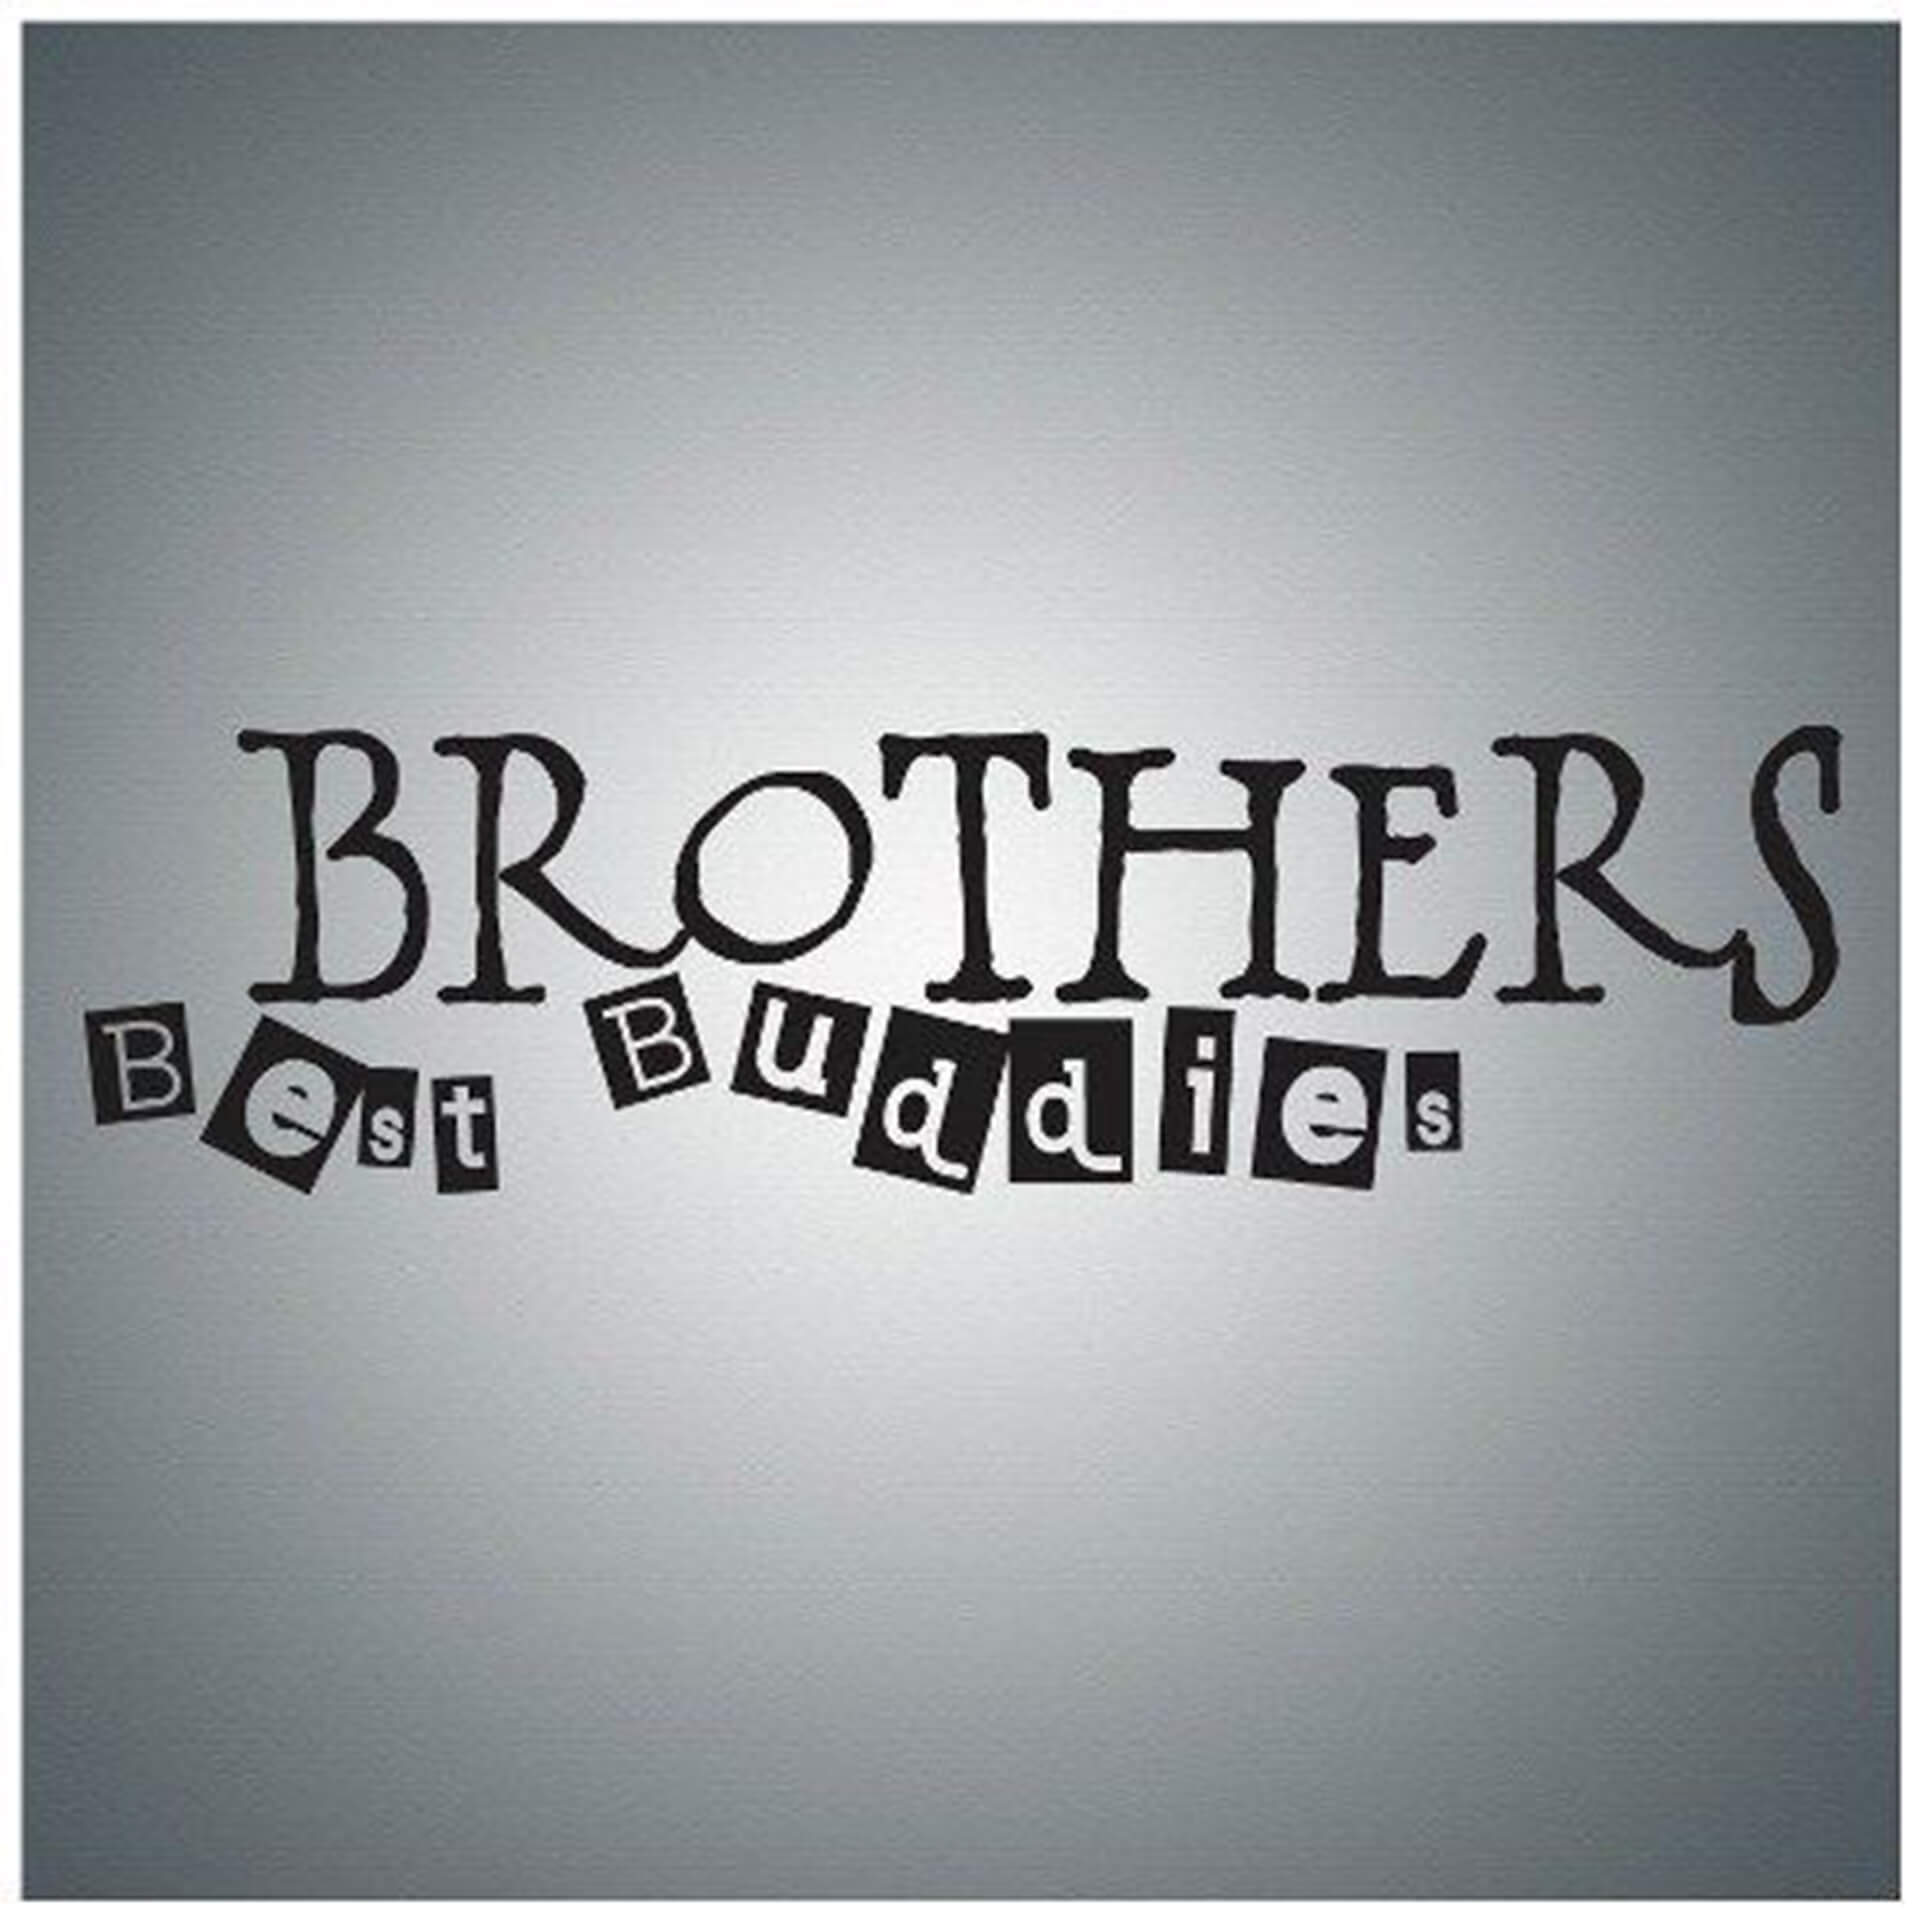 Happy Brothers Day Wishes Greetings Best Buddies Text Image